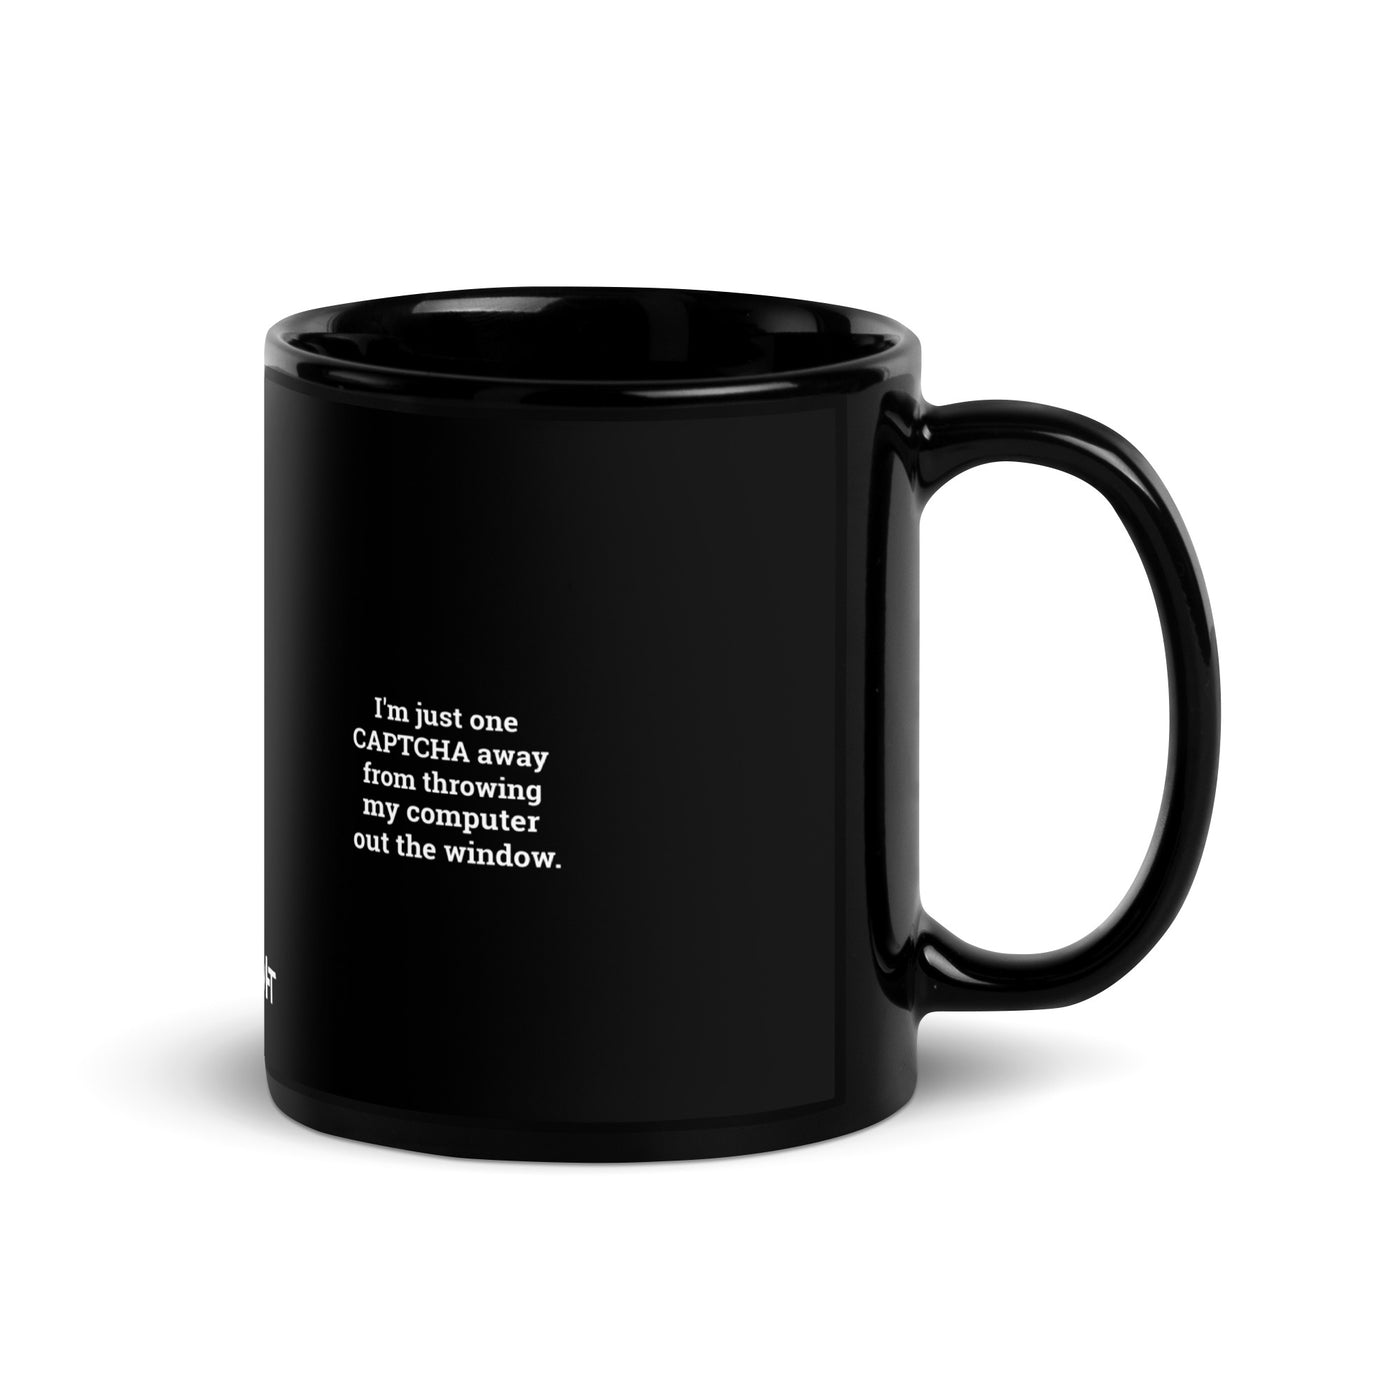 I'm Just one CAPTCHA away from throwing my Computer away V2 - Black Glossy Mug